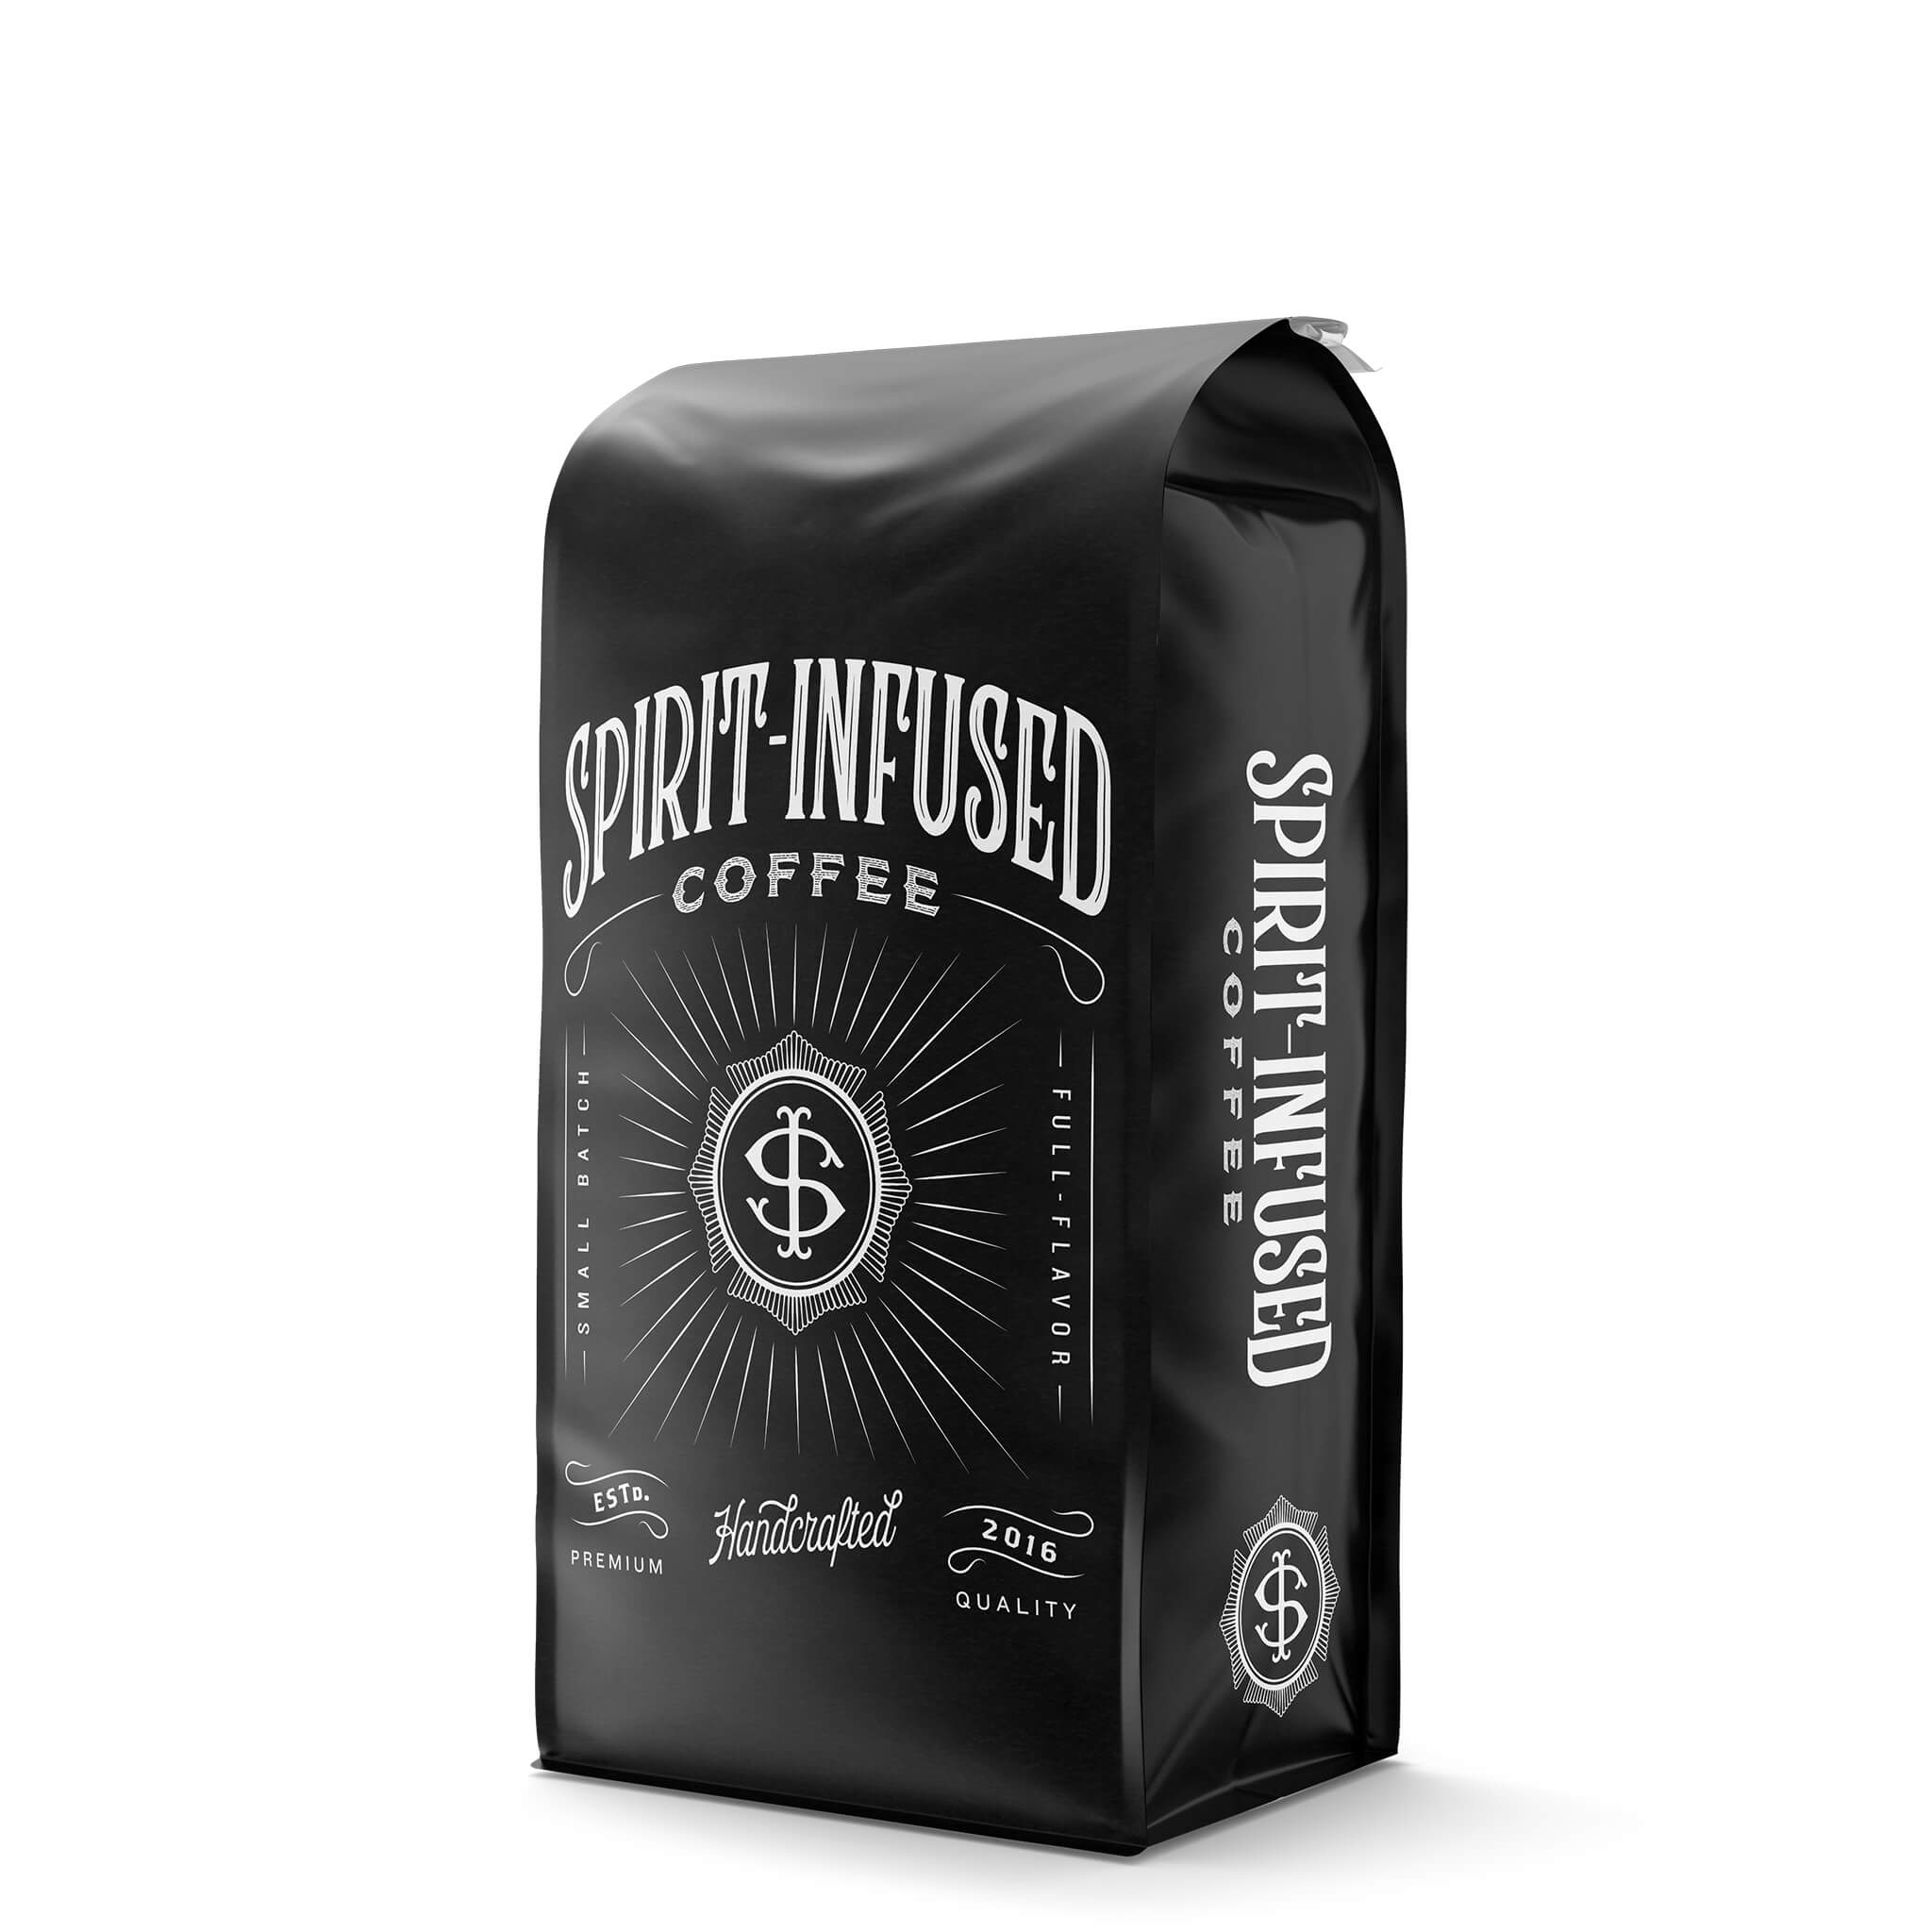 Bag of the Spirit Infused Coffee Club